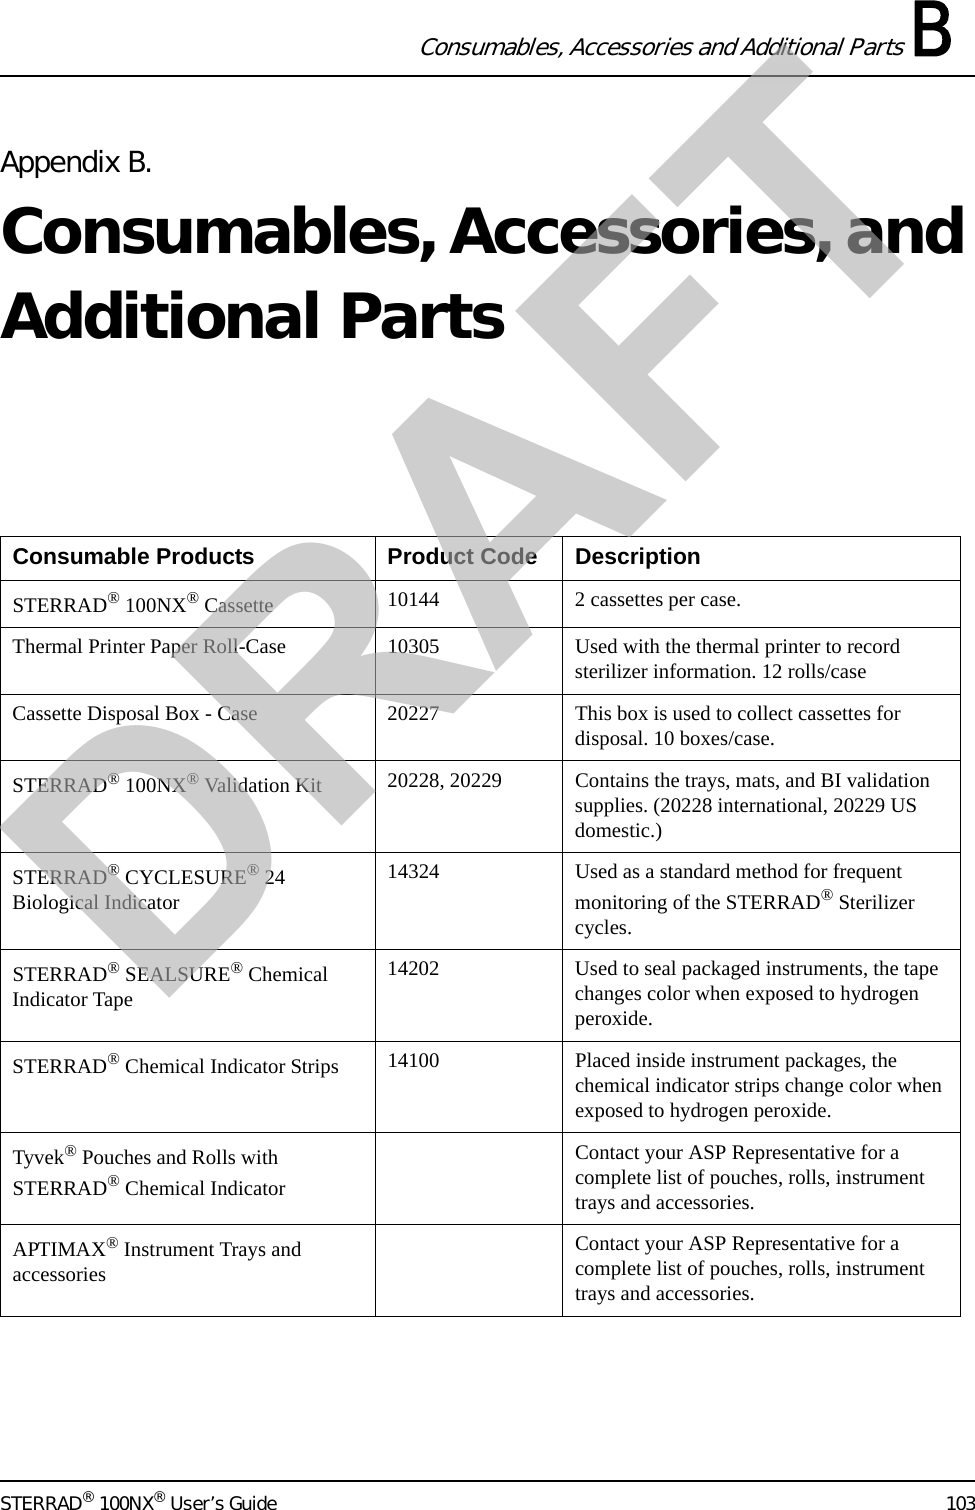 Consumables, Accessories and Additional Parts BSTERRAD® 100NX® User’s Guide 103Appendix B.Consumables, Accessories, and Additional PartsConsumable Products Product Code DescriptionSTERRAD® 100NX® Cassette 10144 2 cassettes per case.Thermal Printer Paper Roll-Case 10305 Used with the thermal printer to record sterilizer information. 12 rolls/caseCassette Disposal Box - Case 20227 This box is used to collect cassettes for disposal. 10 boxes/case.STERRAD® 100NX® Validation Kit 20228, 20229 Contains the trays, mats, and BI validation supplies. (20228 international, 20229 US domestic.)STERRAD® CYCLESURE® 24 Biological Indicator14324 Used as a standard method for frequent monitoring of the STERRAD® Sterilizer cycles. STERRAD® SEALSURE® Chemical Indicator Tape14202 Used to seal packaged instruments, the tape changes color when exposed to hydrogen peroxide.STERRAD® Chemical Indicator Strips 14100 Placed inside instrument packages, the chemical indicator strips change color when exposed to hydrogen peroxide. Tyvek® Pouches and Rolls with STERRAD® Chemical IndicatorContact your ASP Representative for a complete list of pouches, rolls, instrument trays and accessories.APTIMAX® Instrument Trays and accessoriesContact your ASP Representative for a complete list of pouches, rolls, instrument trays and accessories.DRAFT